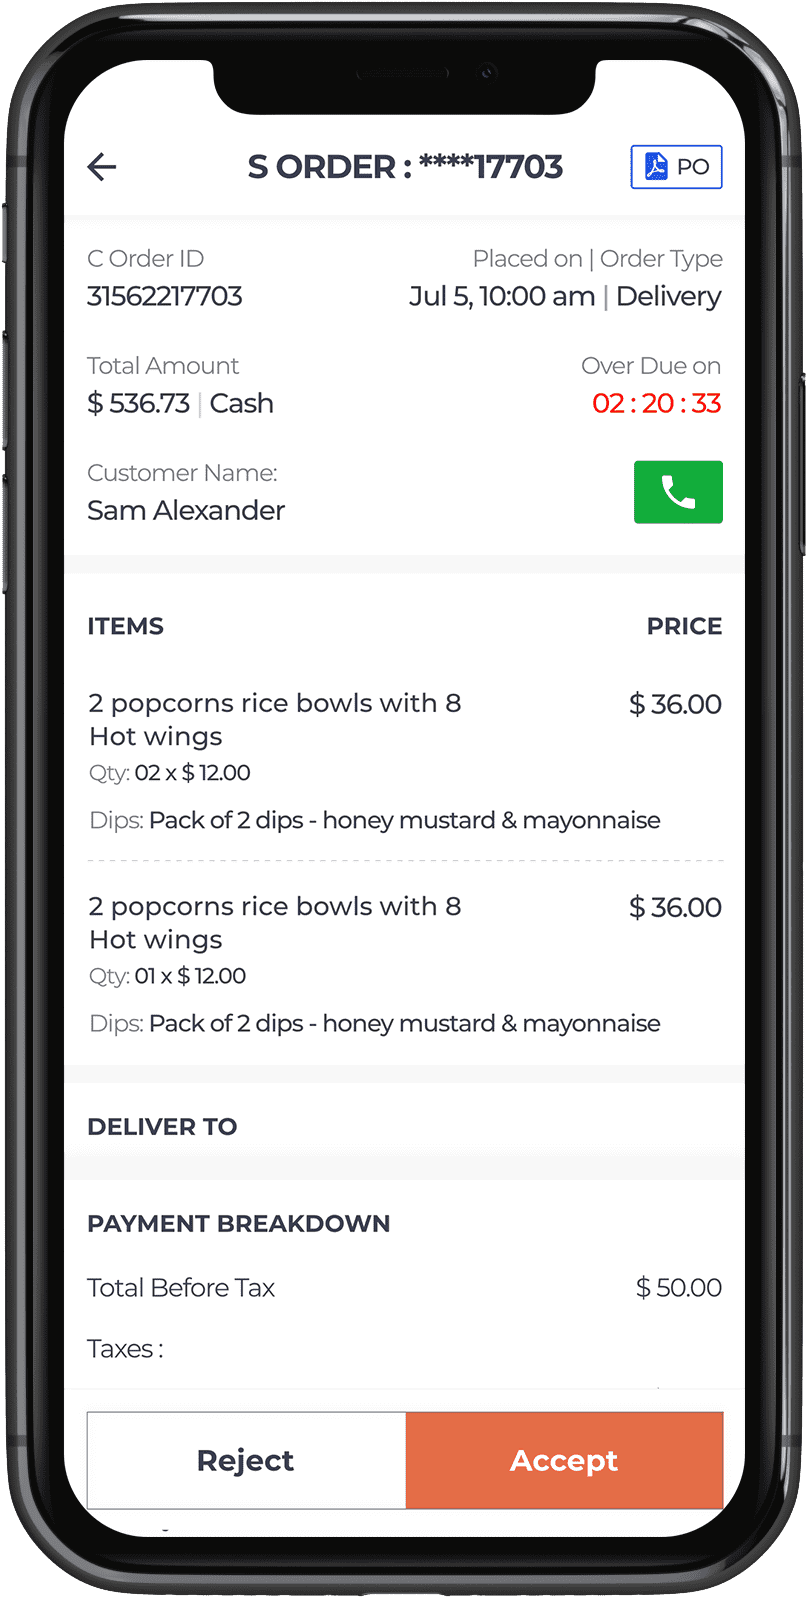 check-order-details-before-accepting-in-food-delivery-picker-app.png